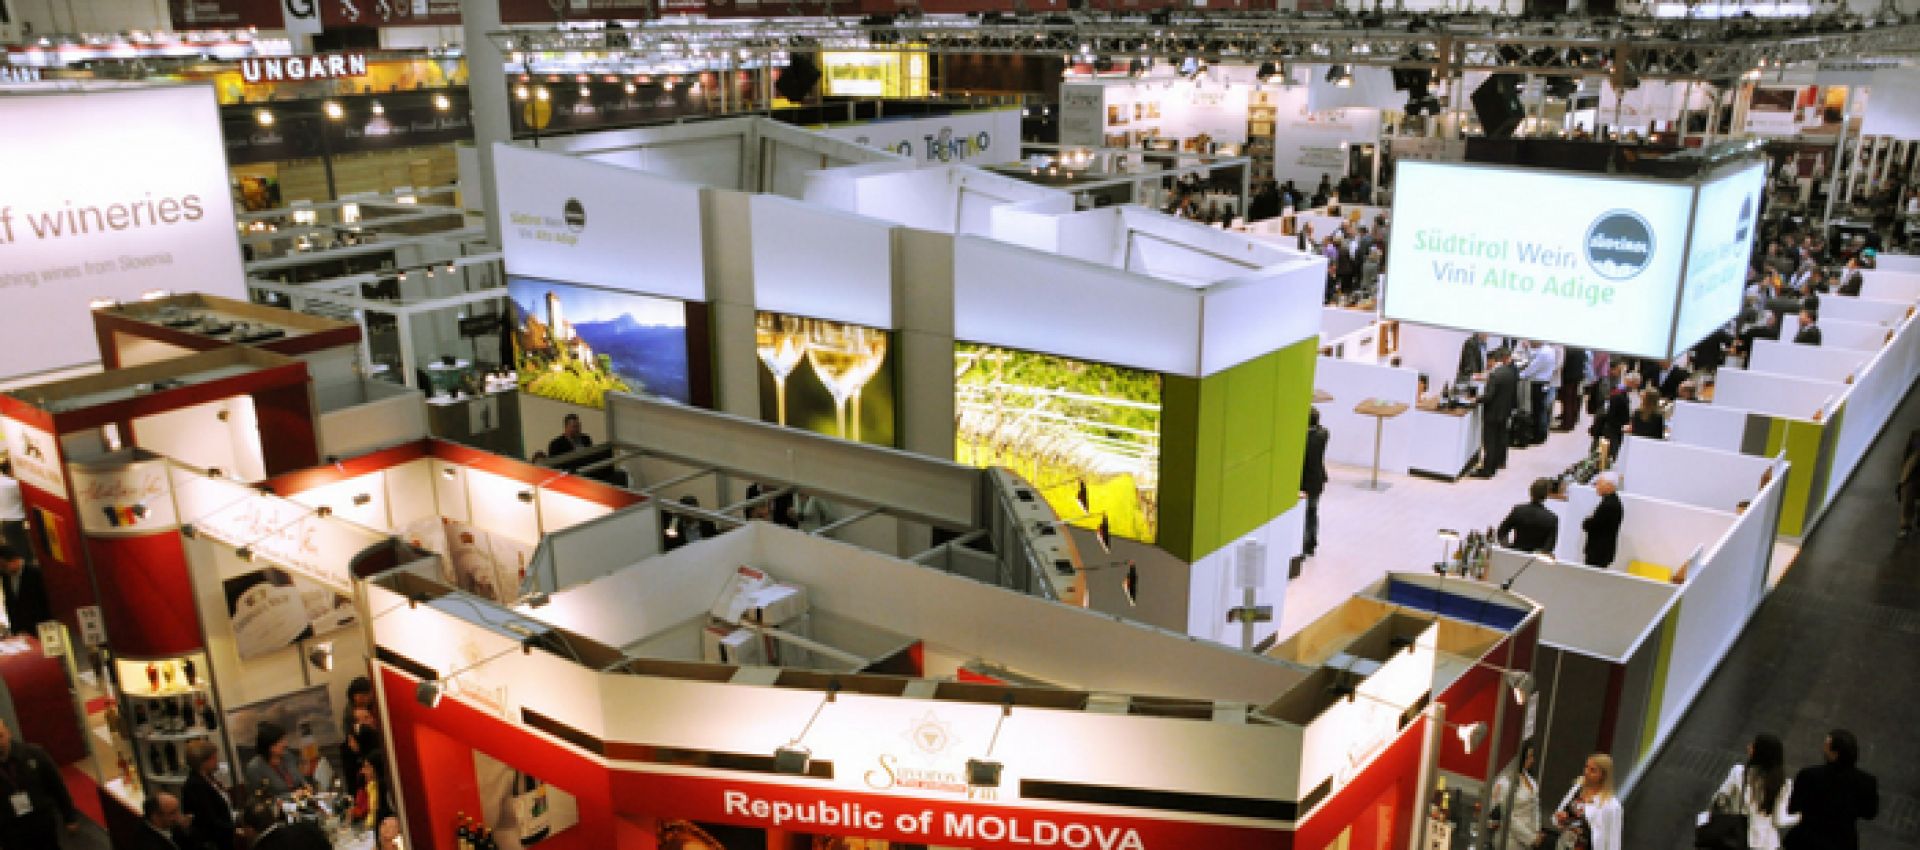 Photo for: Top 12 Major International Wine Trade Shows & Events